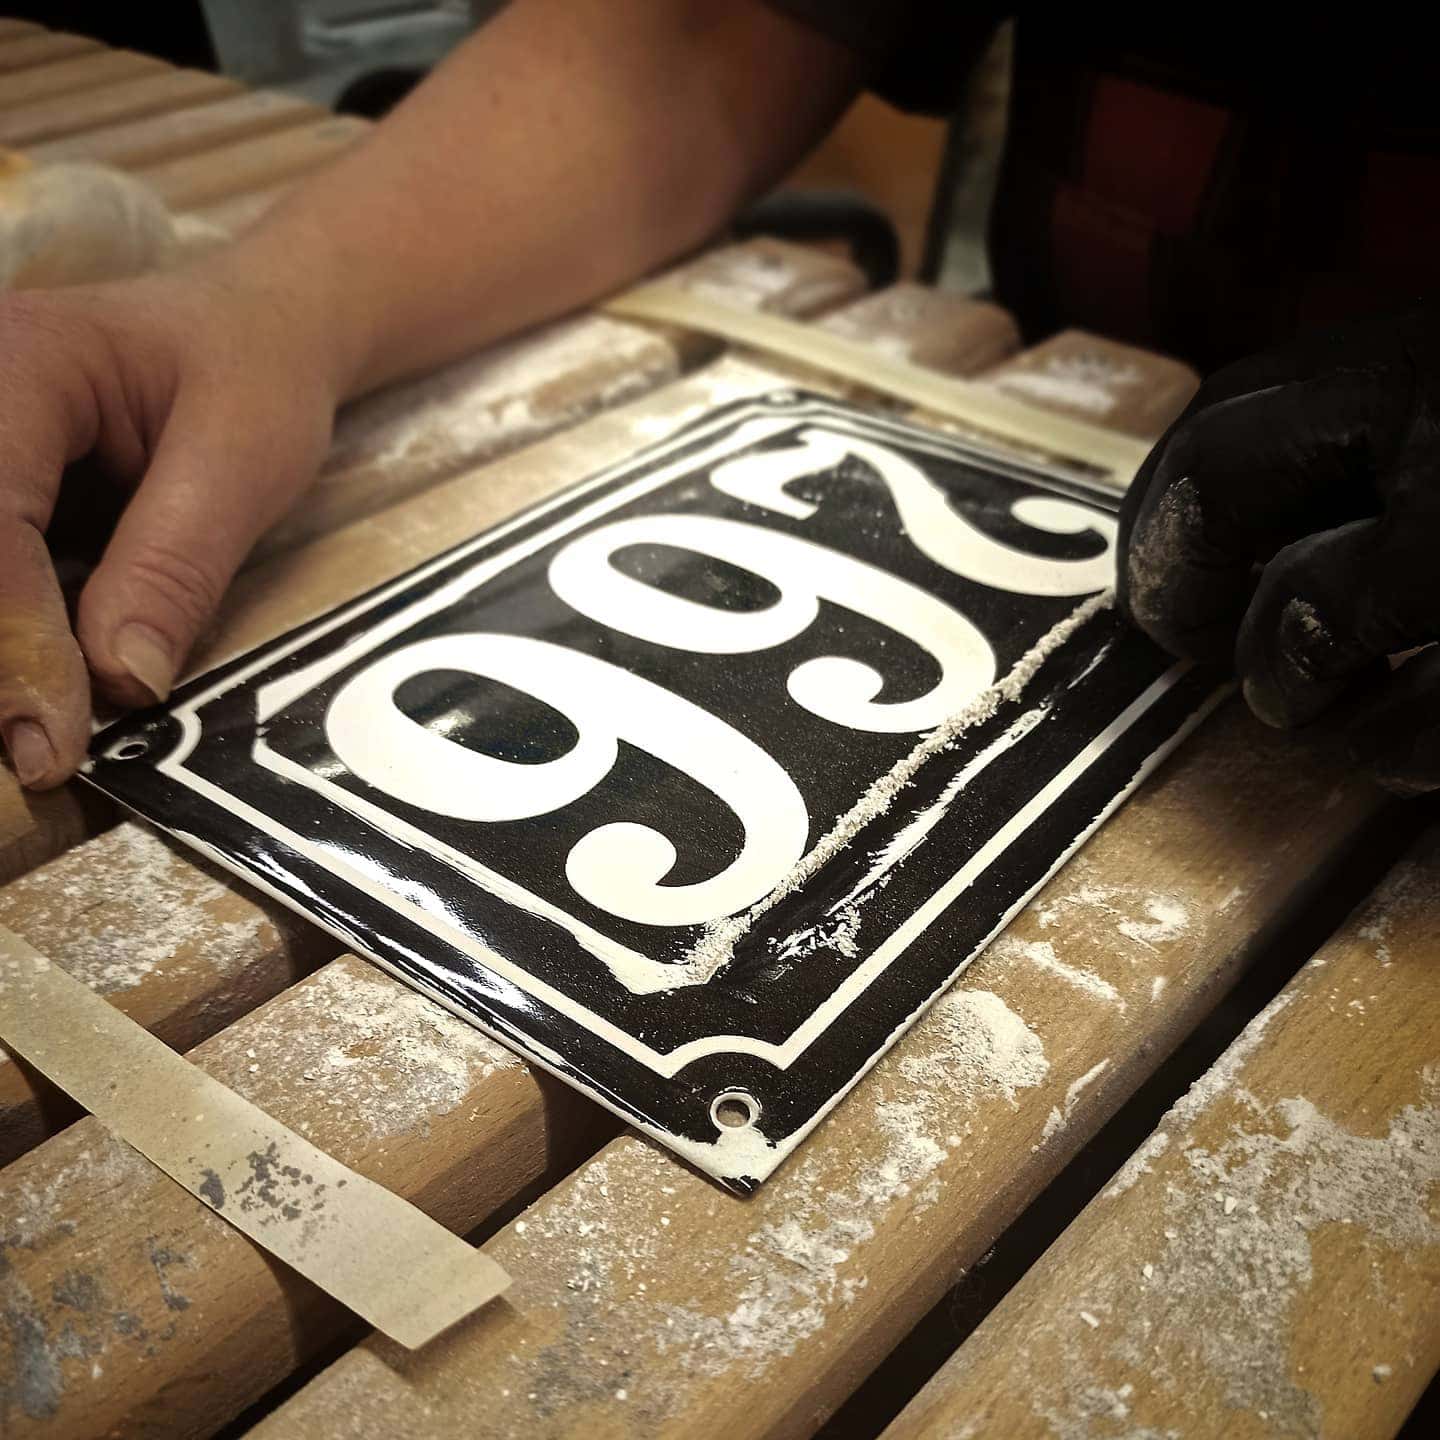 Enamel sign production by hand